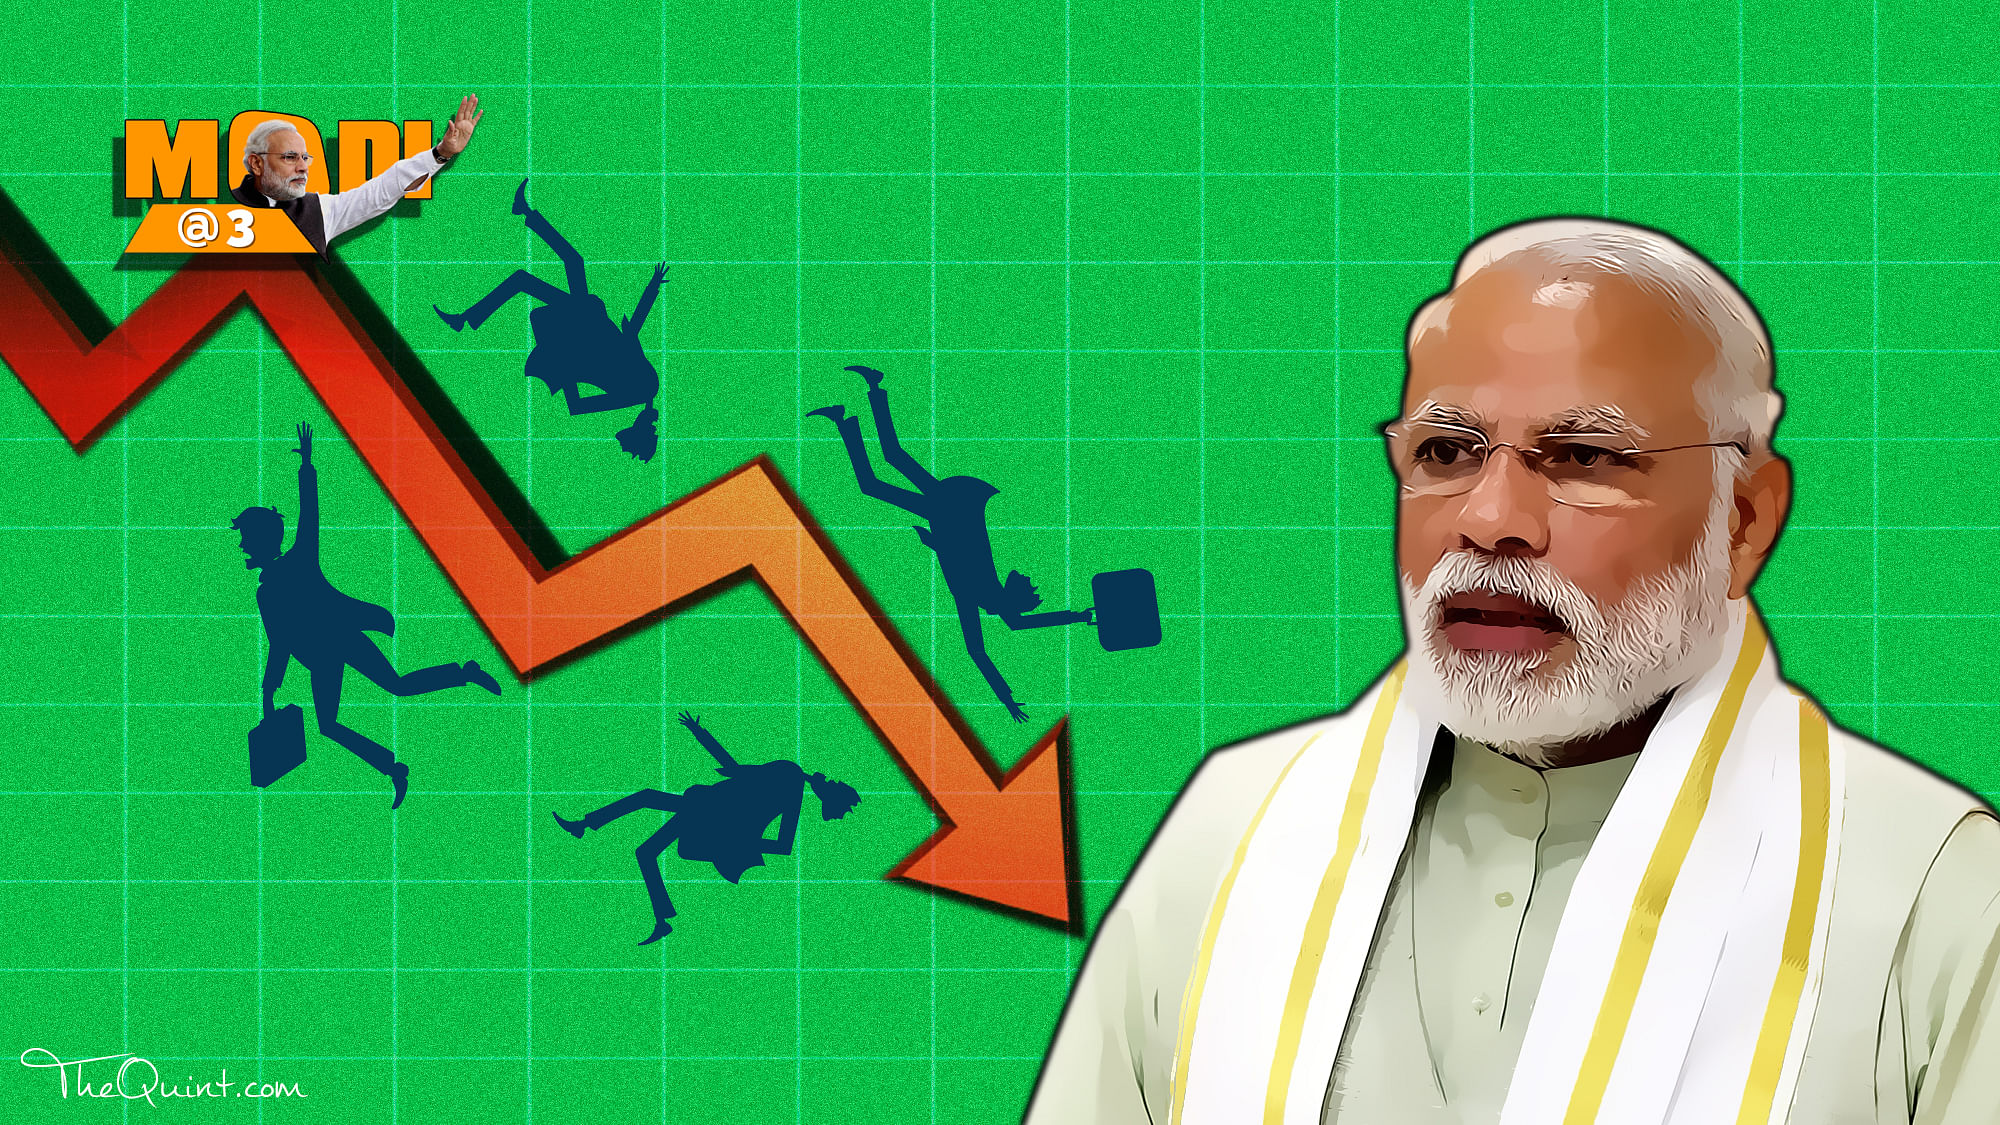 

As the BJP government completes three years in office this week, <a href="http://www.indiaspend.com/cover-story/three-years-into-bjp-government-unemployment-rate-slightly-up-32091">IndiaSpend</a> analyses five of its key electoral promises – employment, Swachh Bharat, roads, access to electricity and terrorism. (Photo: Rhythum Seth/<b>The Quint</b>)